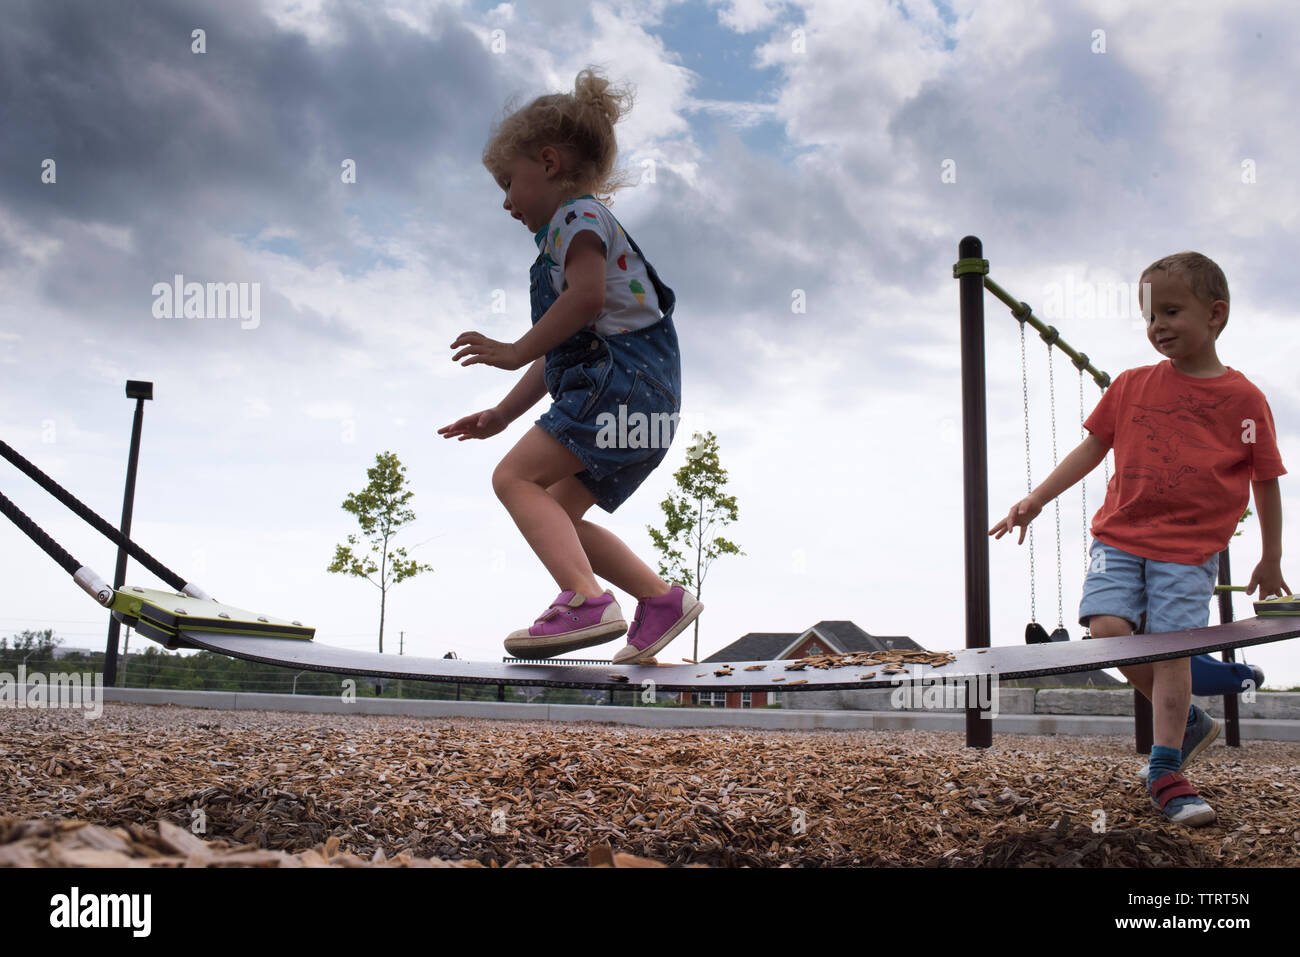 Low angle view of siblings playing on outdoor play equipment at playground against storm clouds Stock Photo